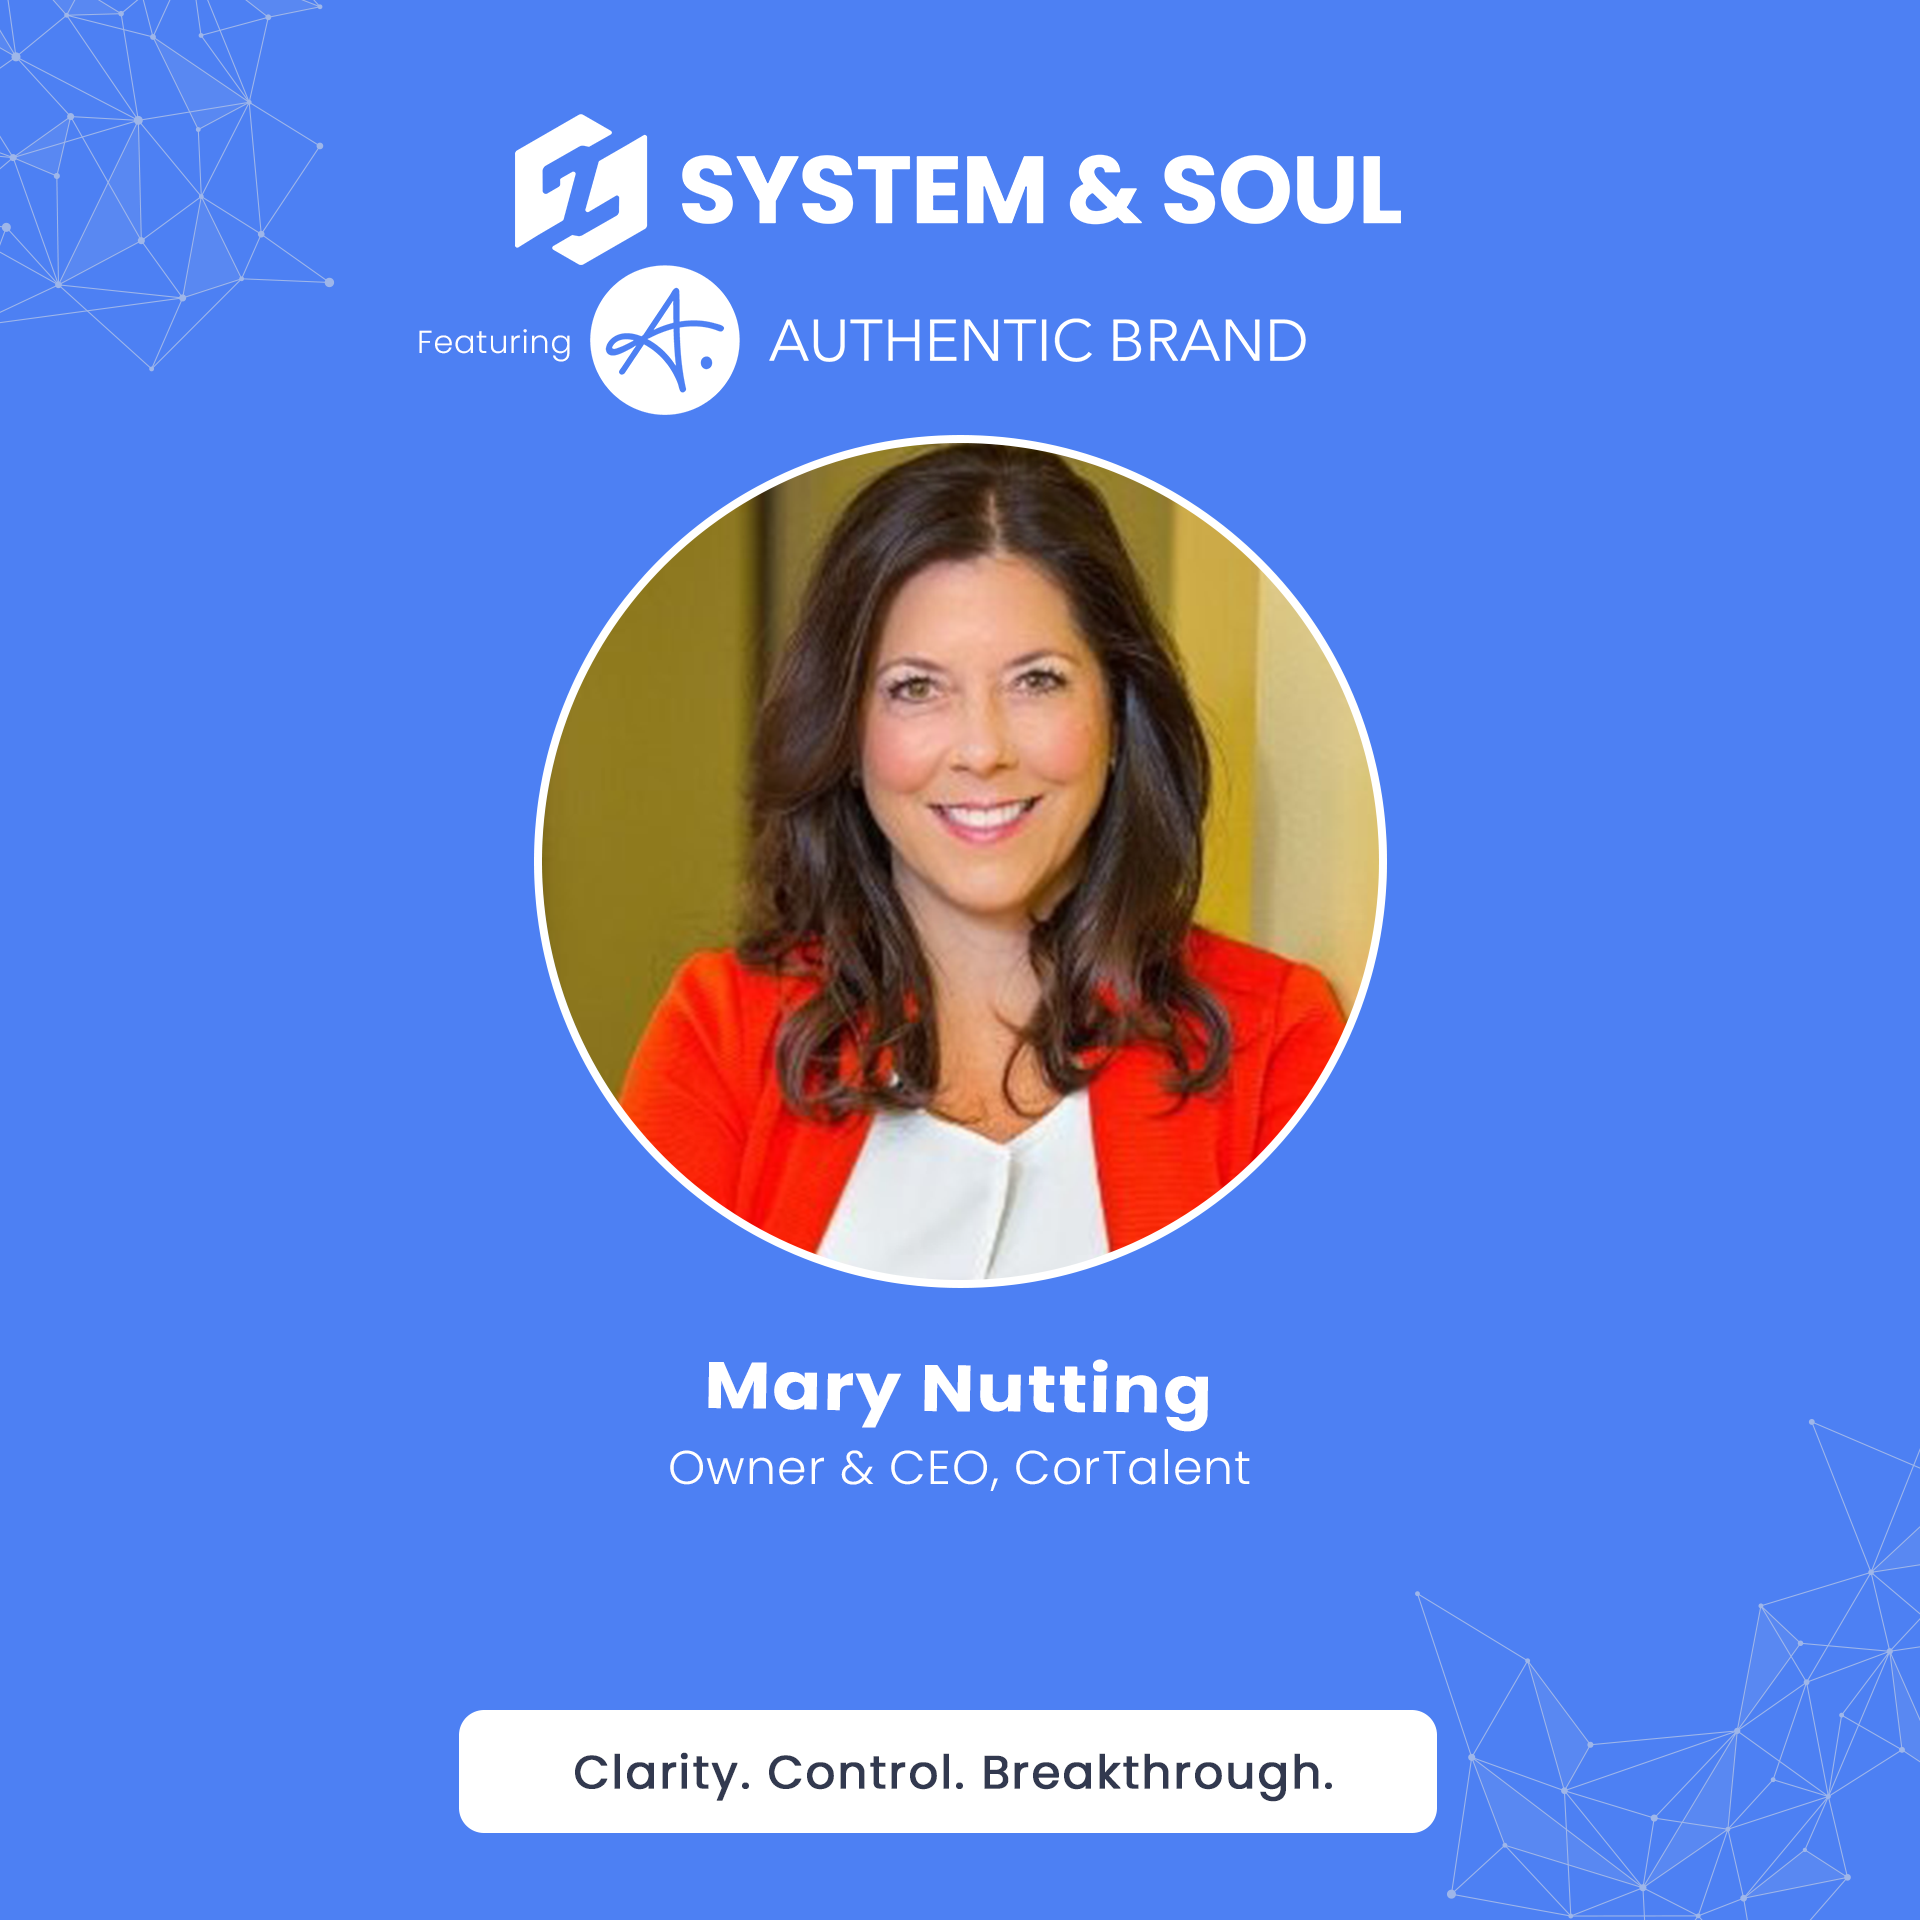 039-Authentic-Growth-Through-Employment-Brand-and-Culture-with-Mary-Nutting-FINAL